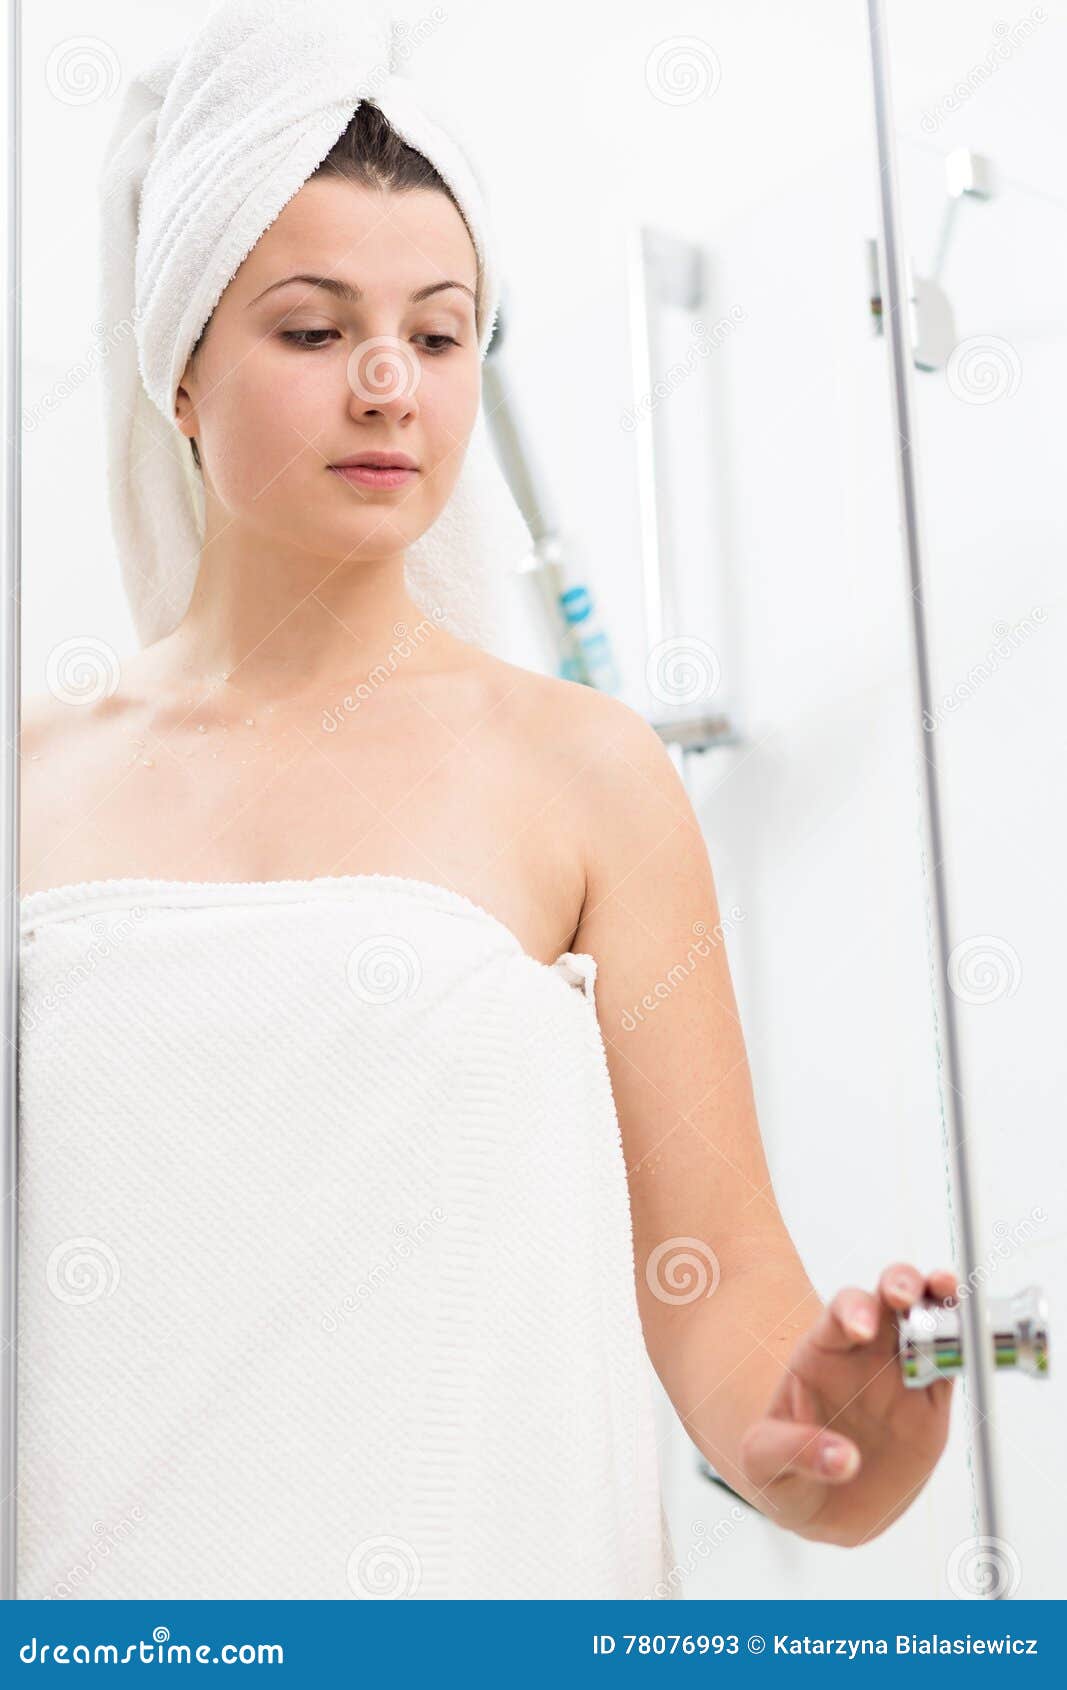 Feeling Fresh And Clean Stock Image Image Of Water Interior 78076993